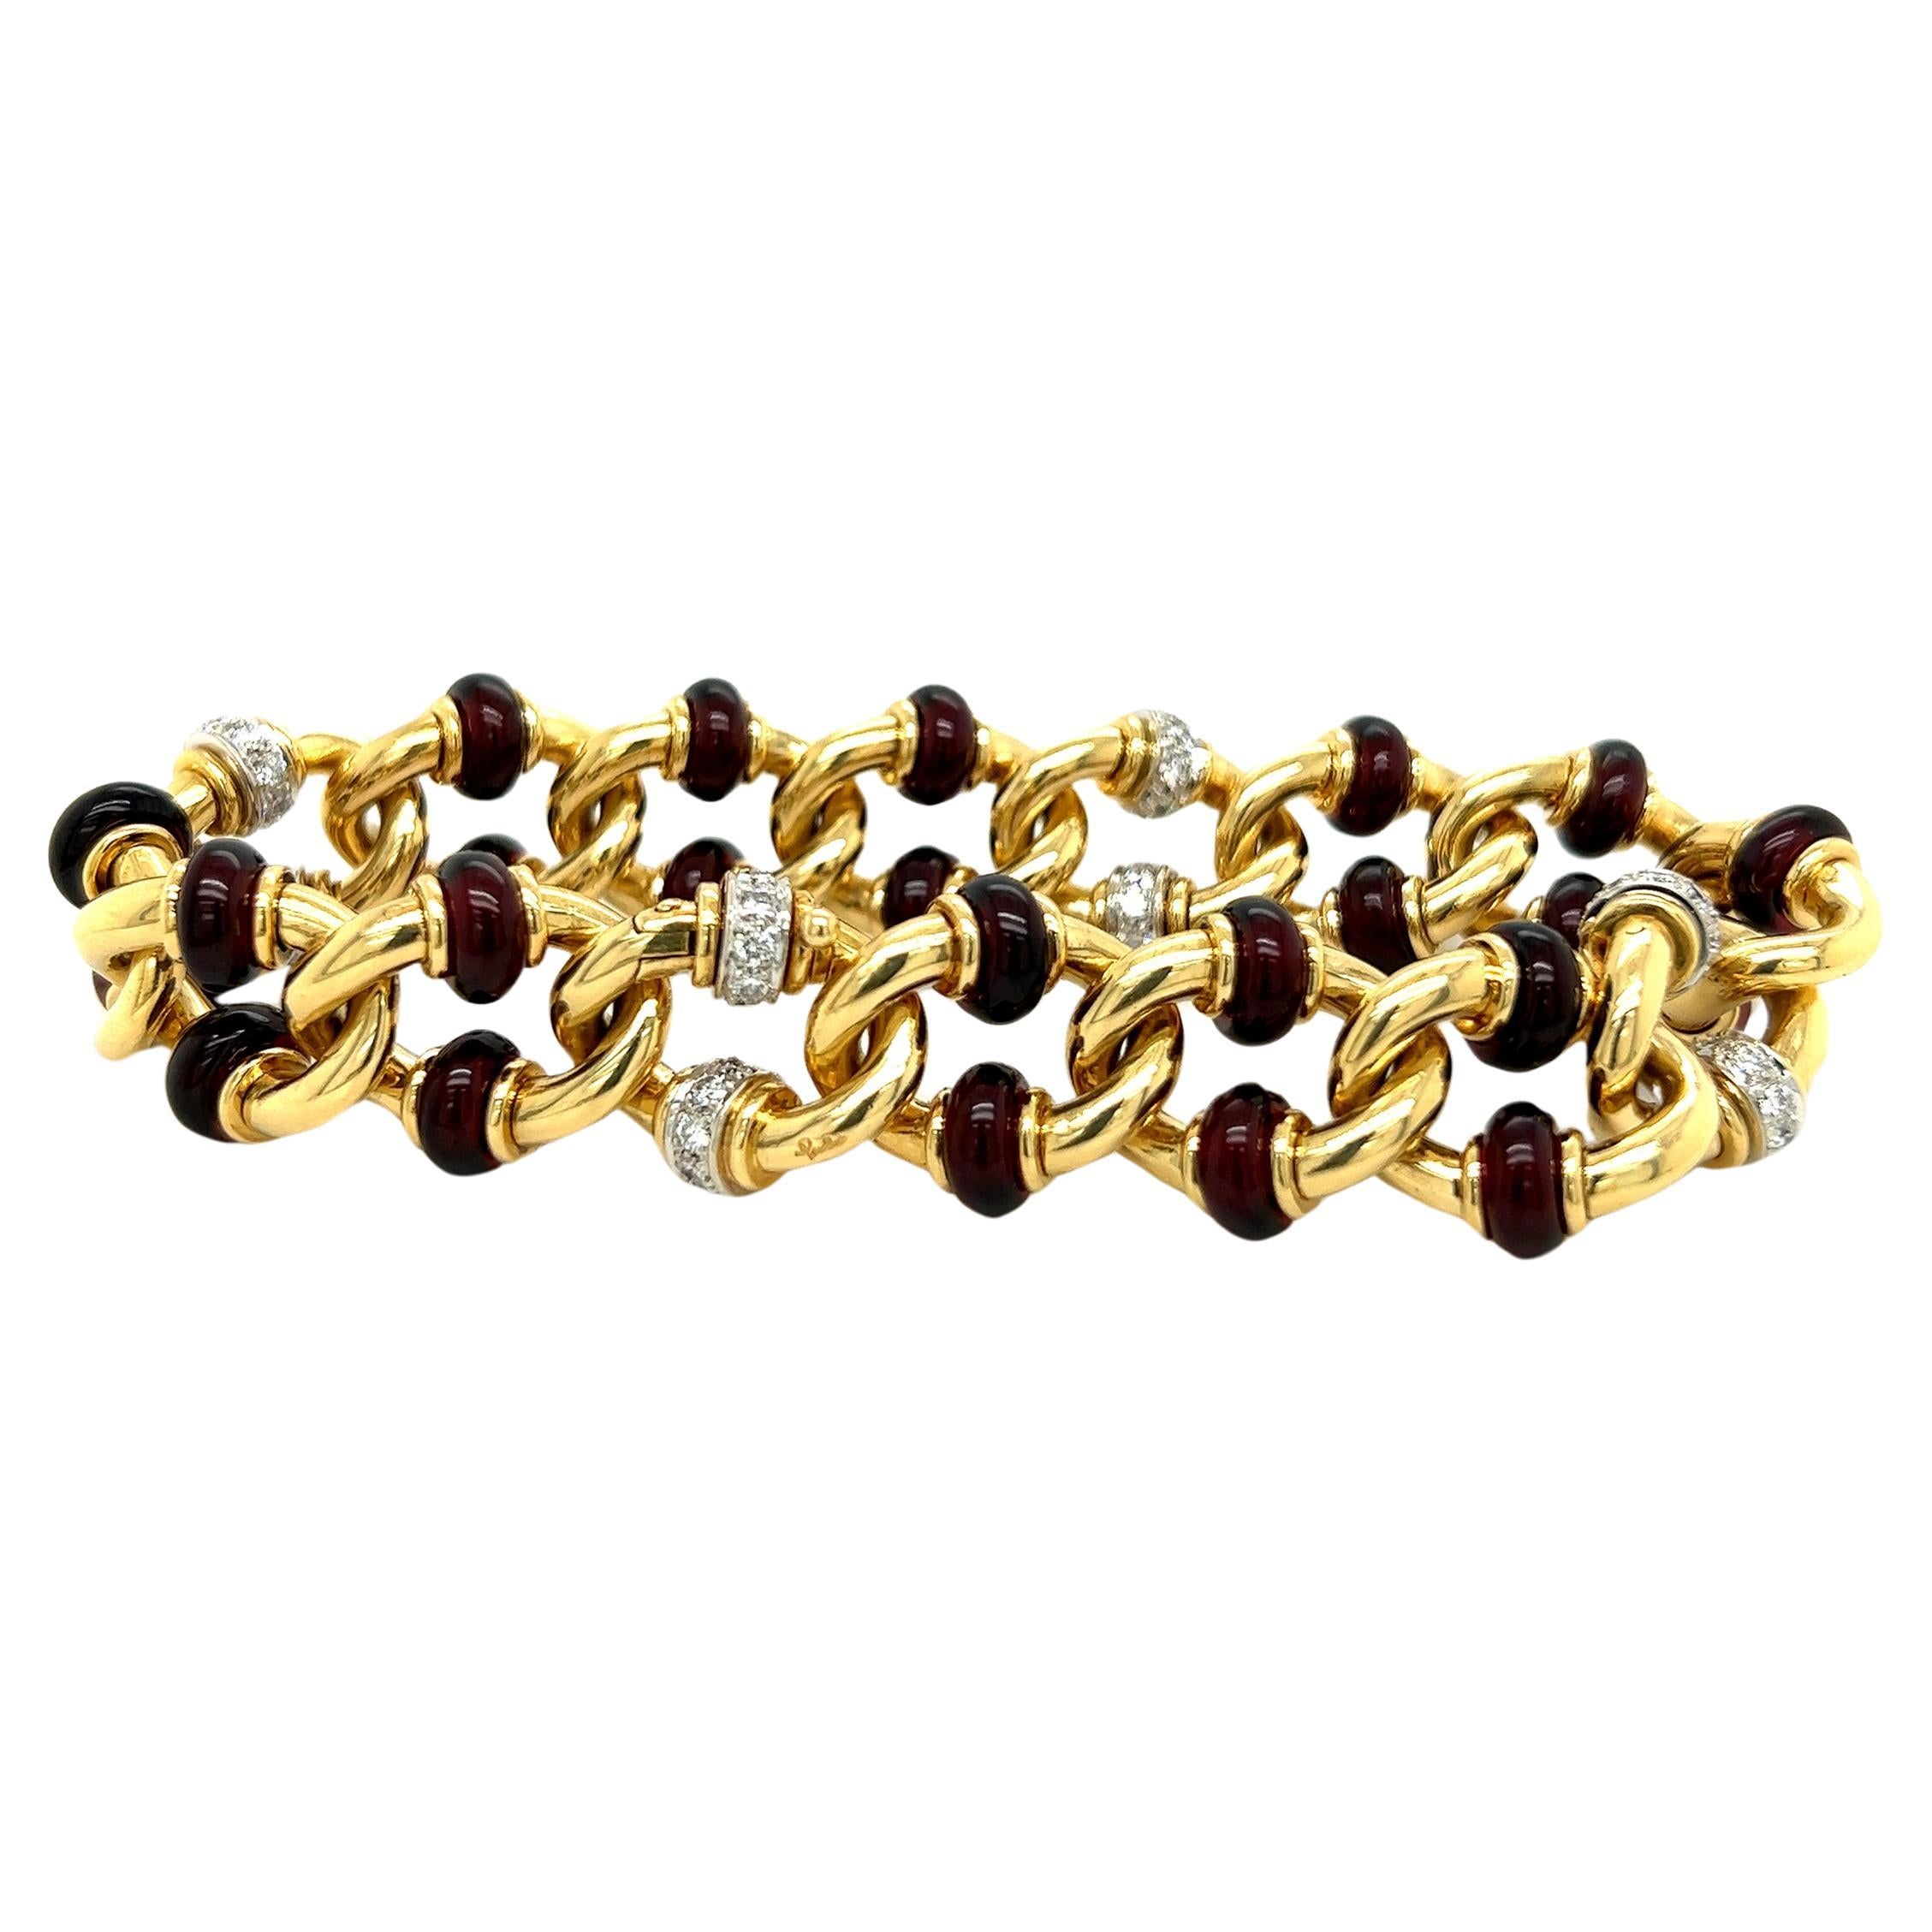 One-of-a-kind, Extra-ordinary, Original 1987 Chic and absolutely Timeless Pomellato Famous Gourmette Bracelet, here declined in the precious hand inlaid garnet diamond version, a beautiful example of Italian Craftsman of the period: circa 1.40